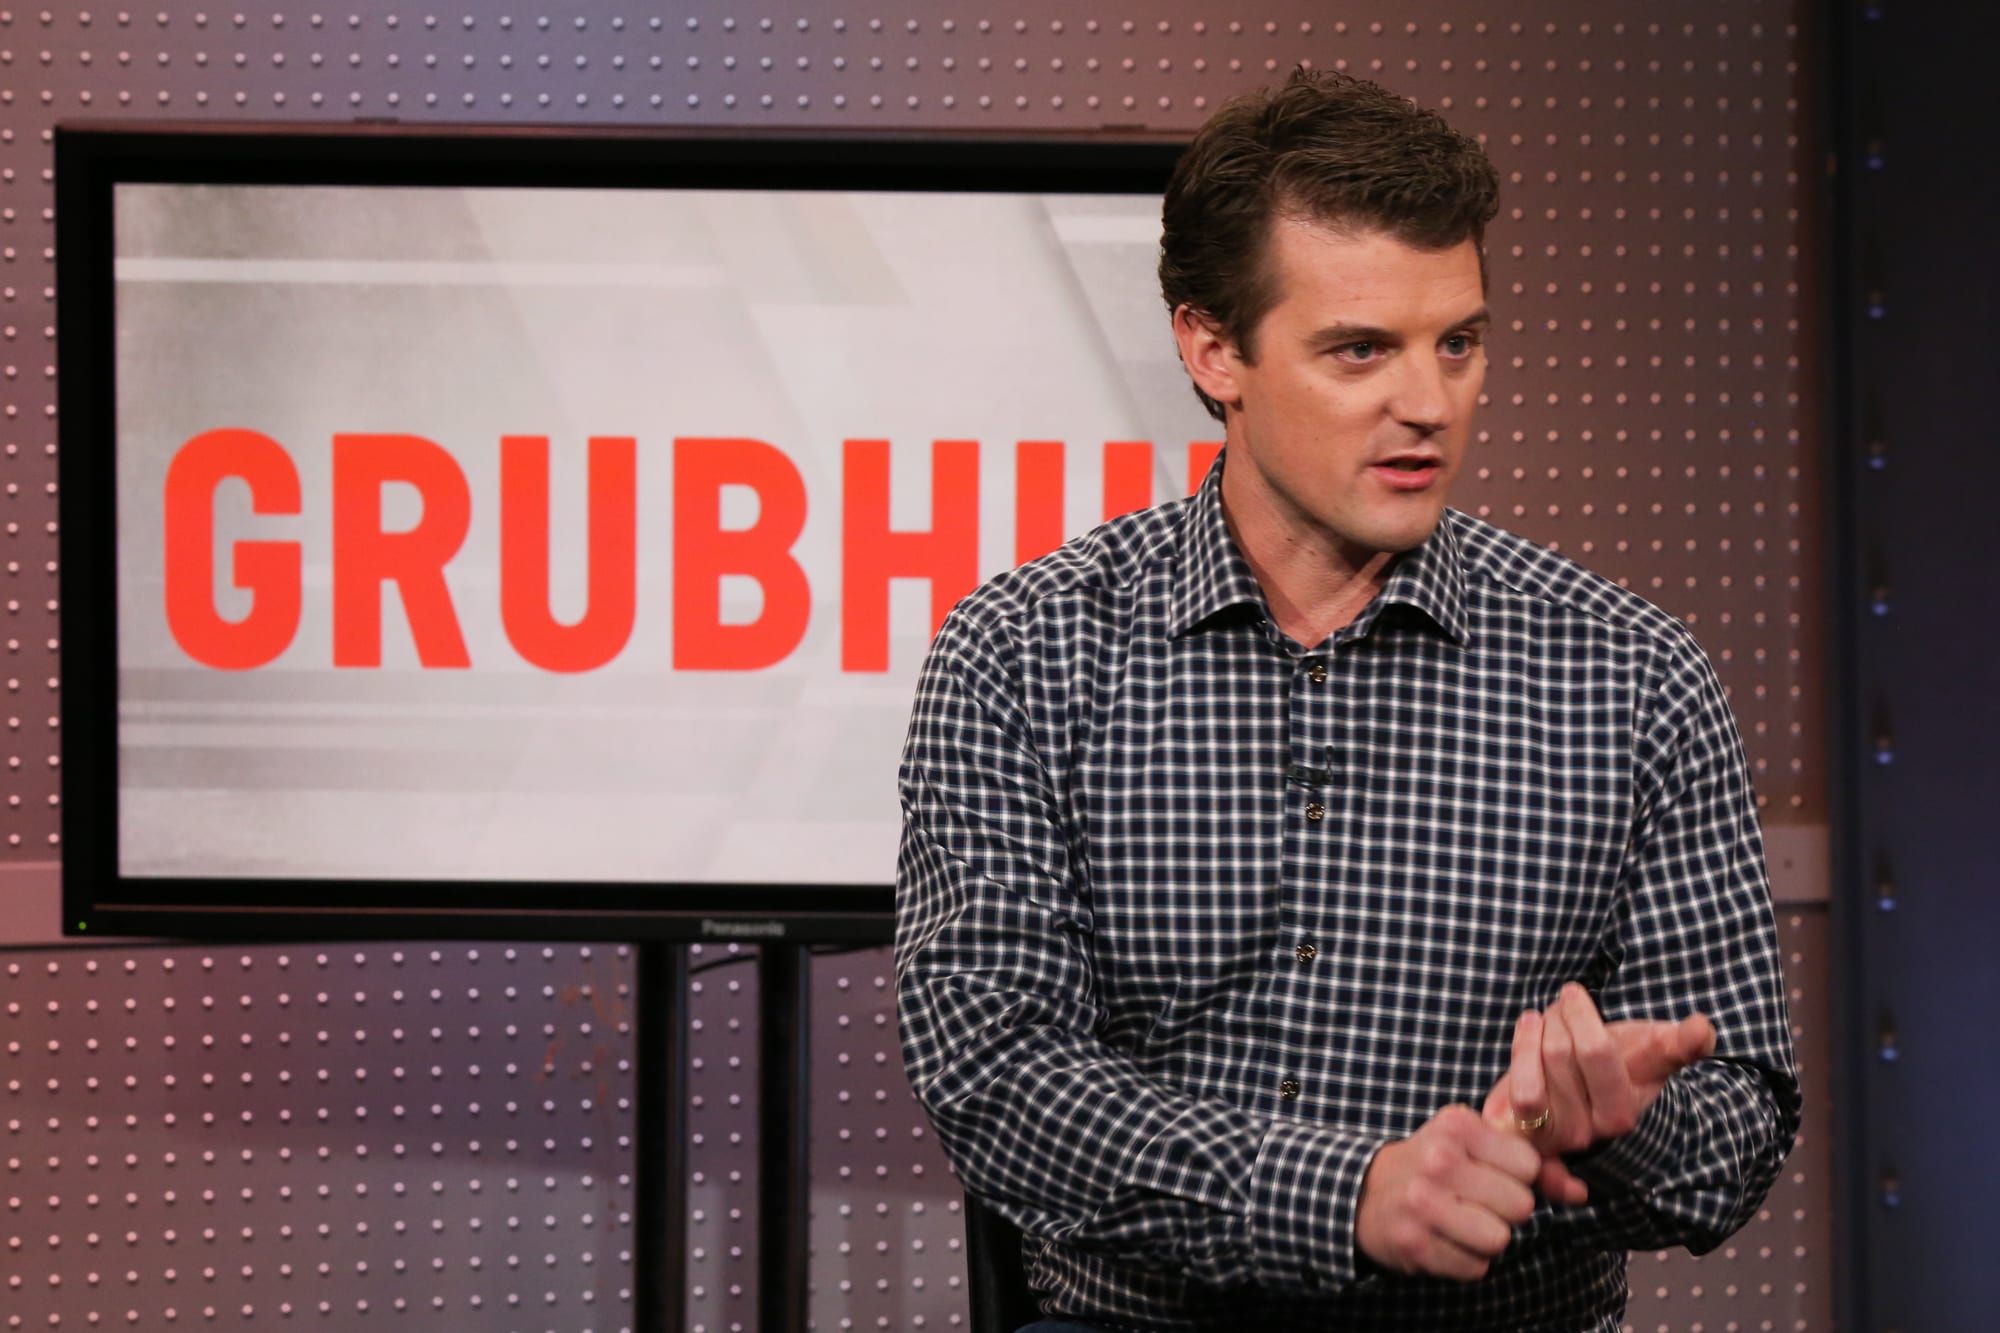 Grubhub to merge with European delivery company Just Eat Takeaway.com